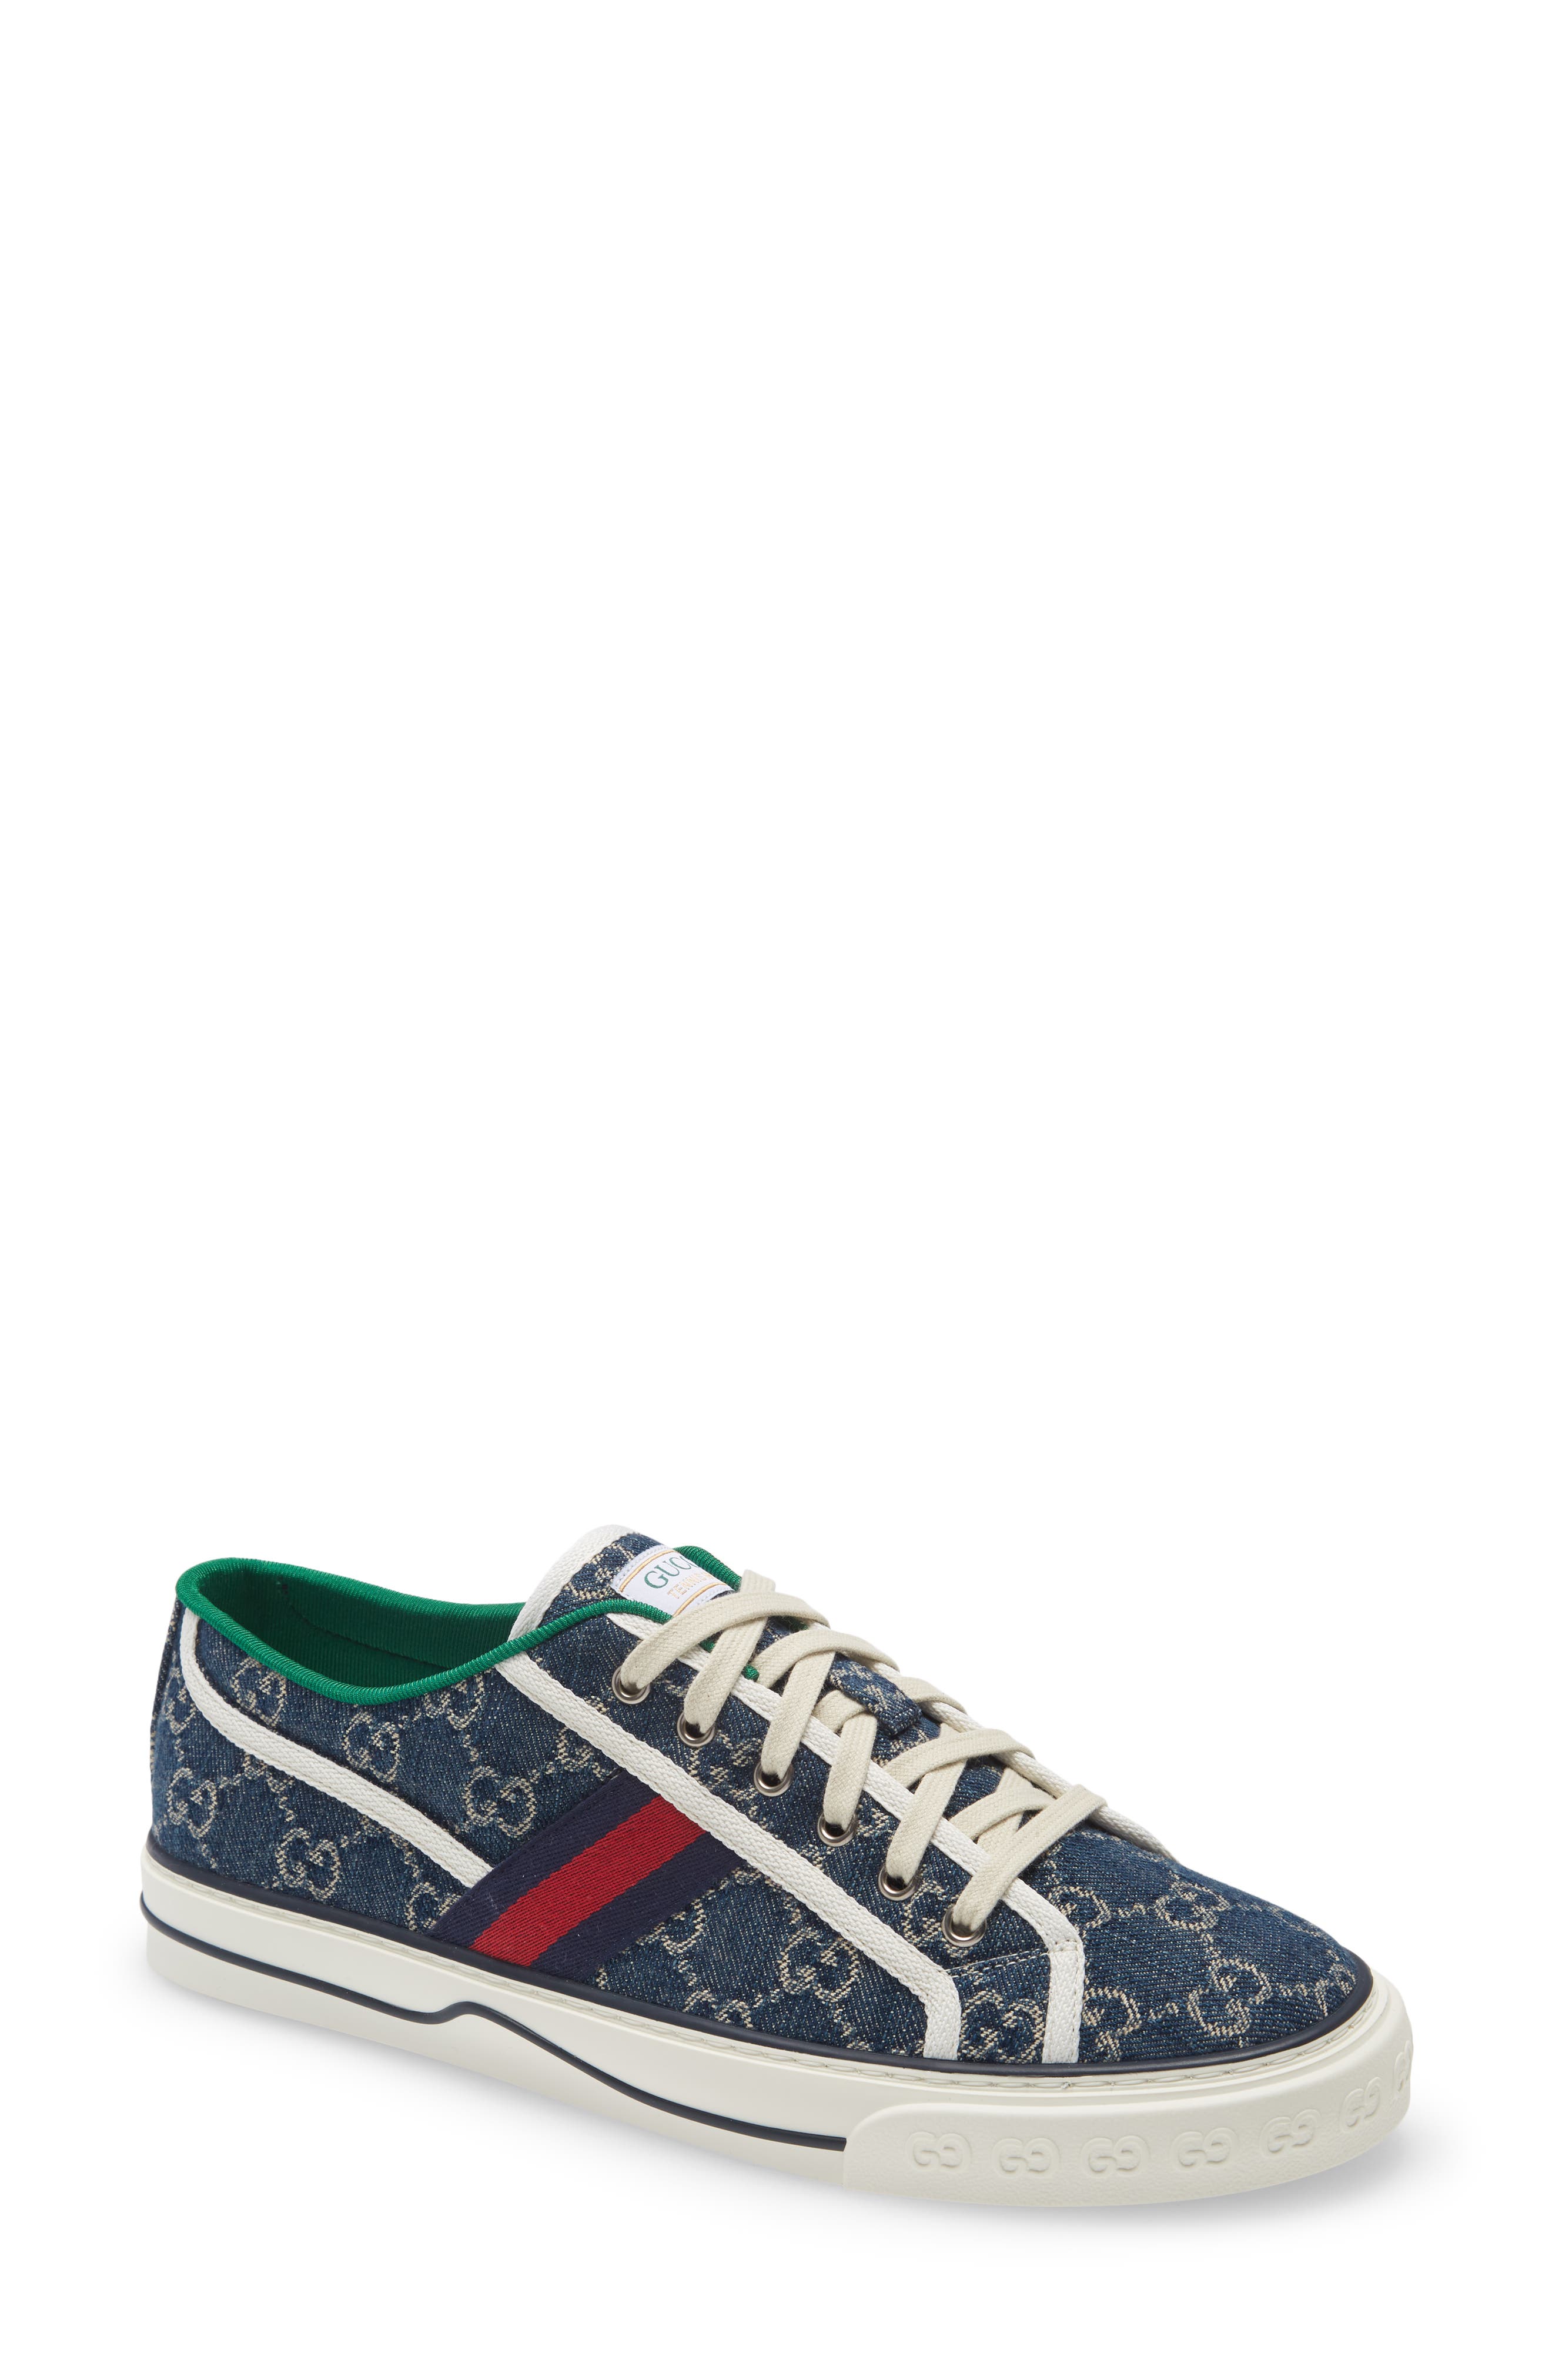 gucci white sneakers mens